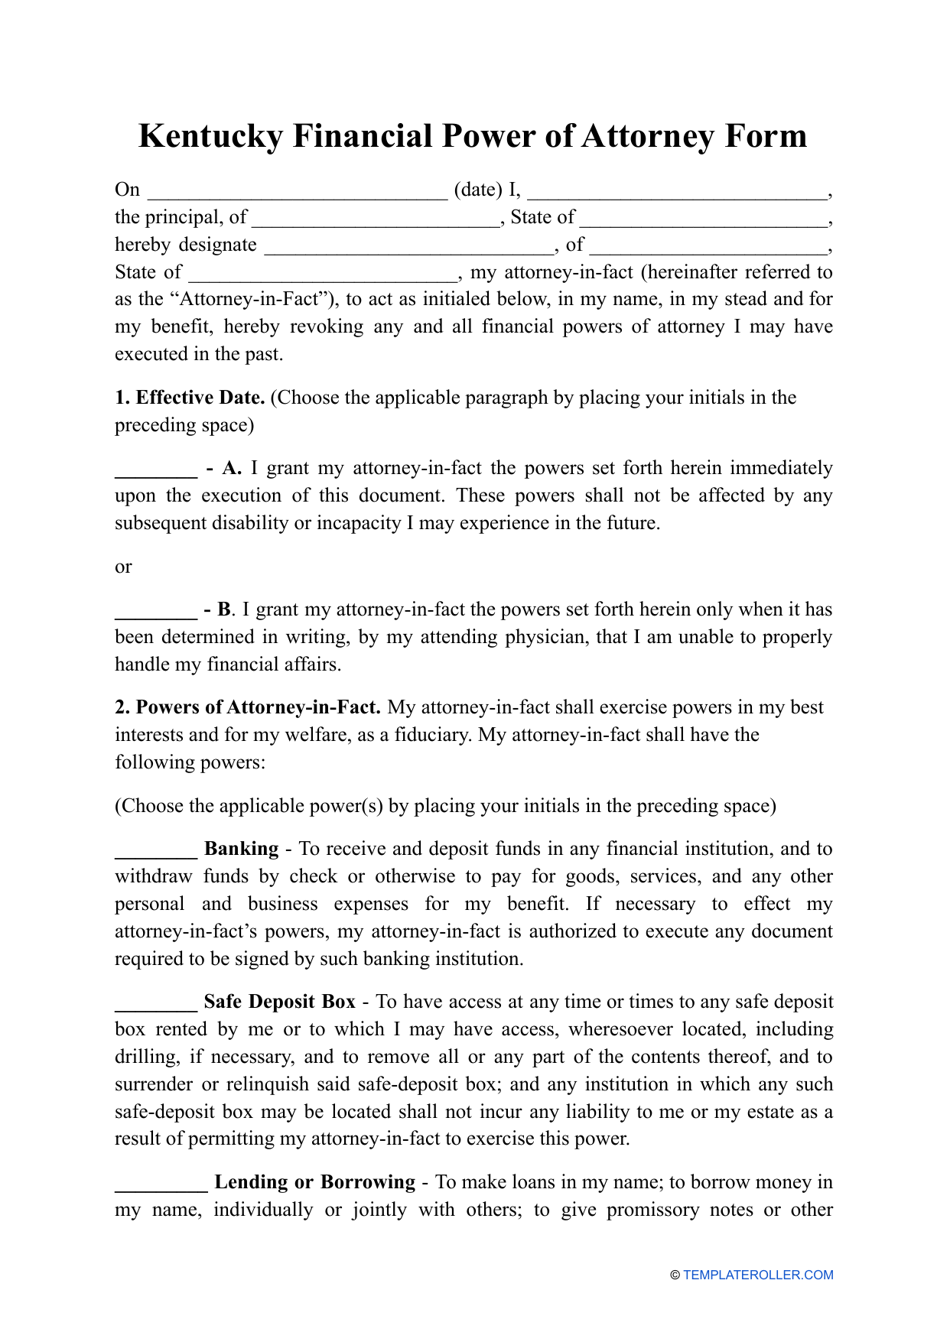 Financial Power of Attorney Form - Kentucky, Page 1